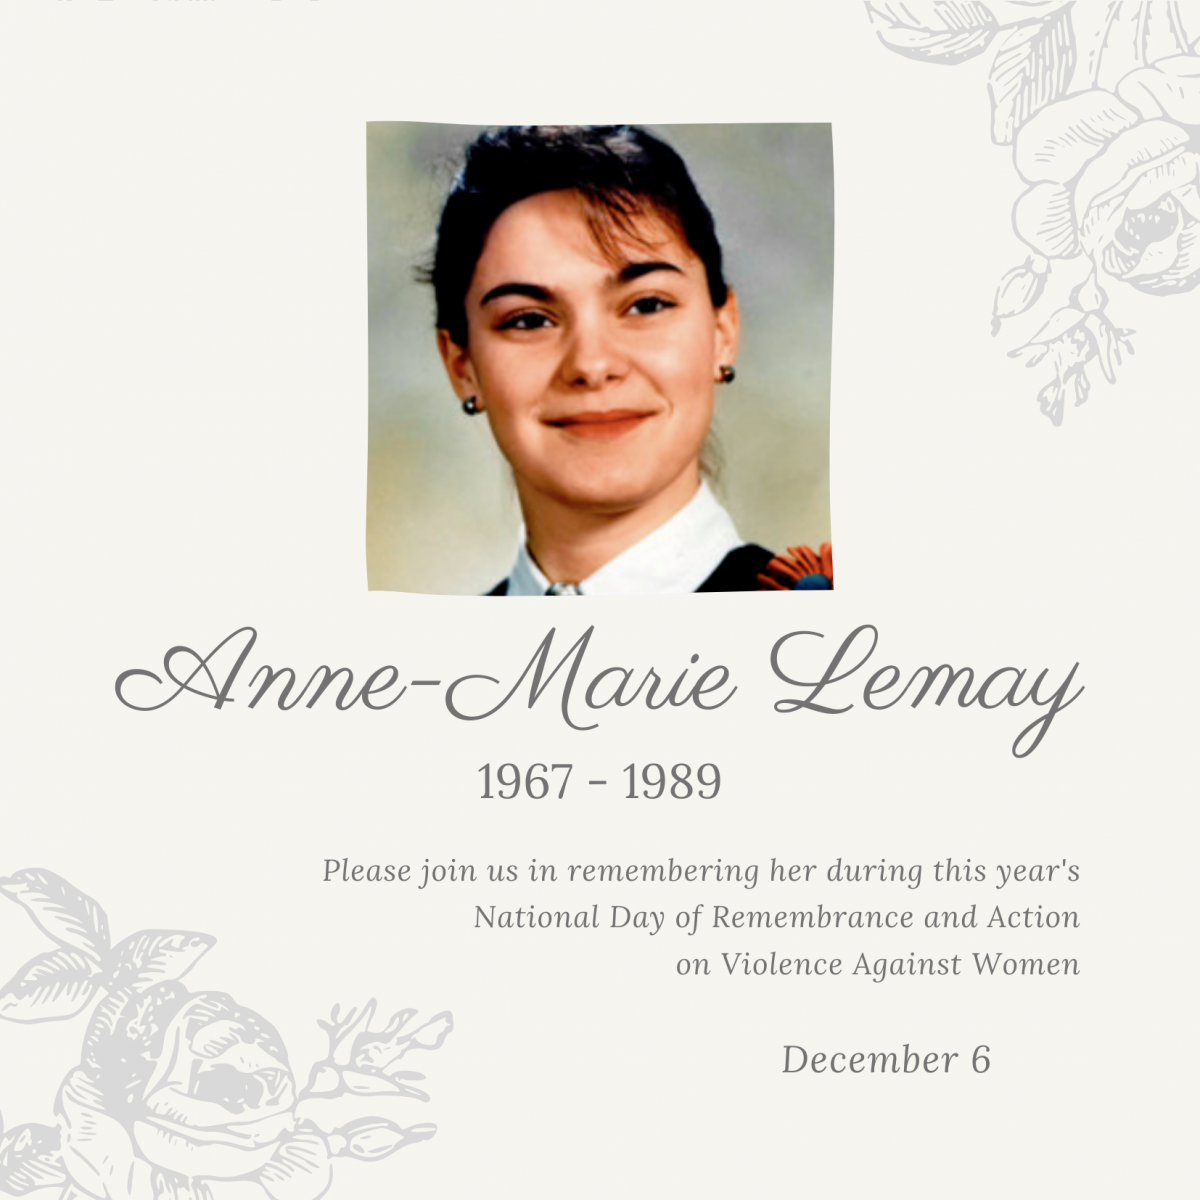 Anne-Marie Lemay. 1967 to 1989